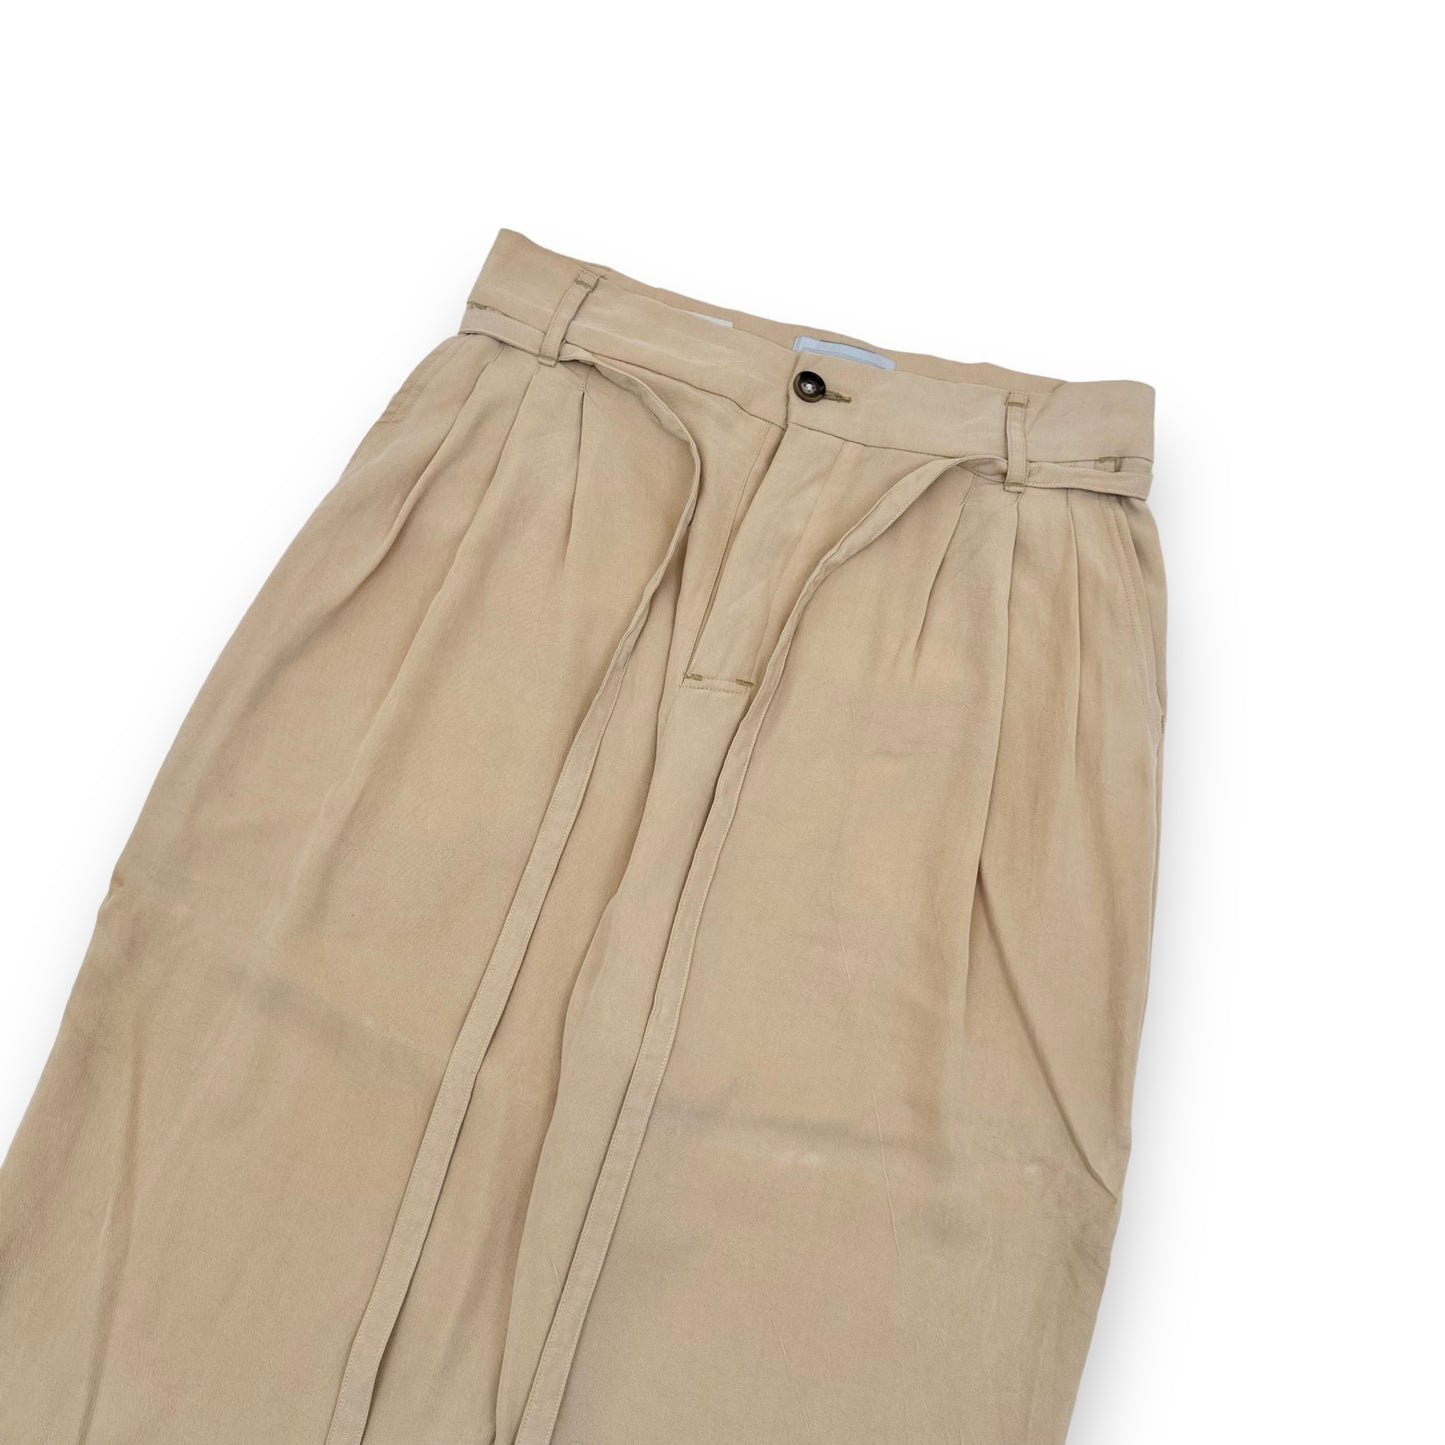 L’EQUIP RELAXED LA TROUSERS YELLOW / BEIGE 34”